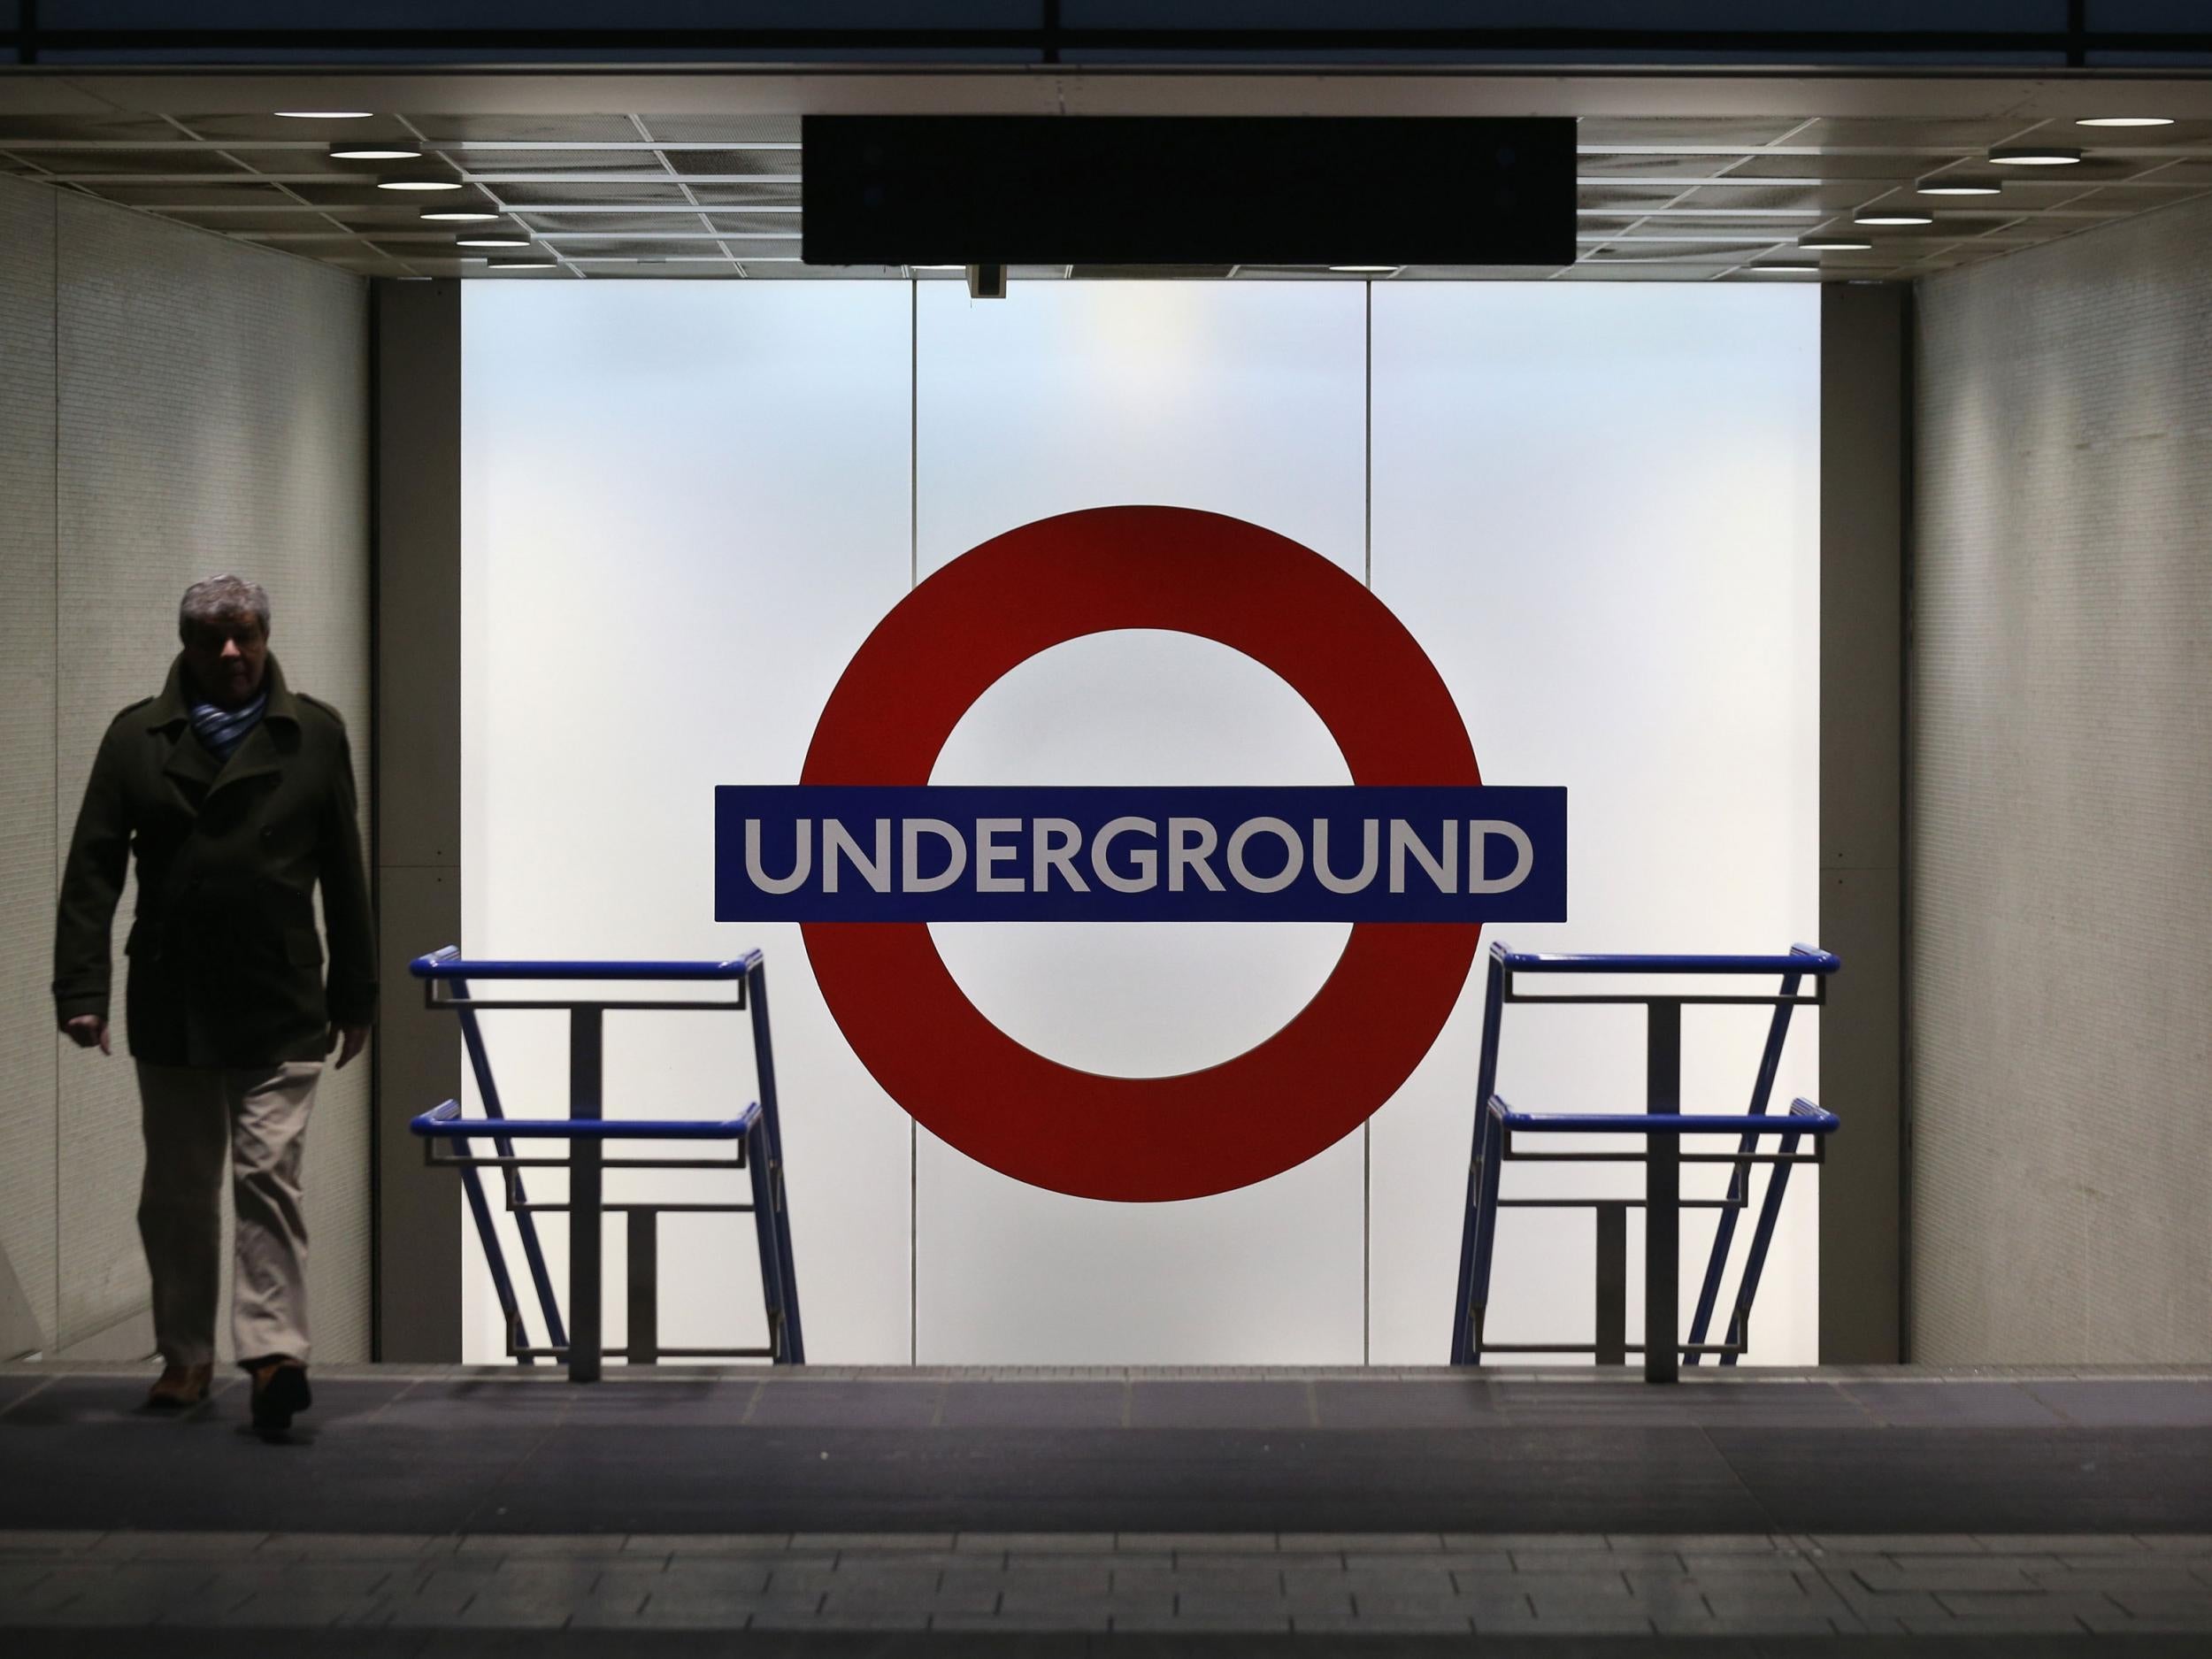 Members of the public use the London Underground in Kings Cross Station